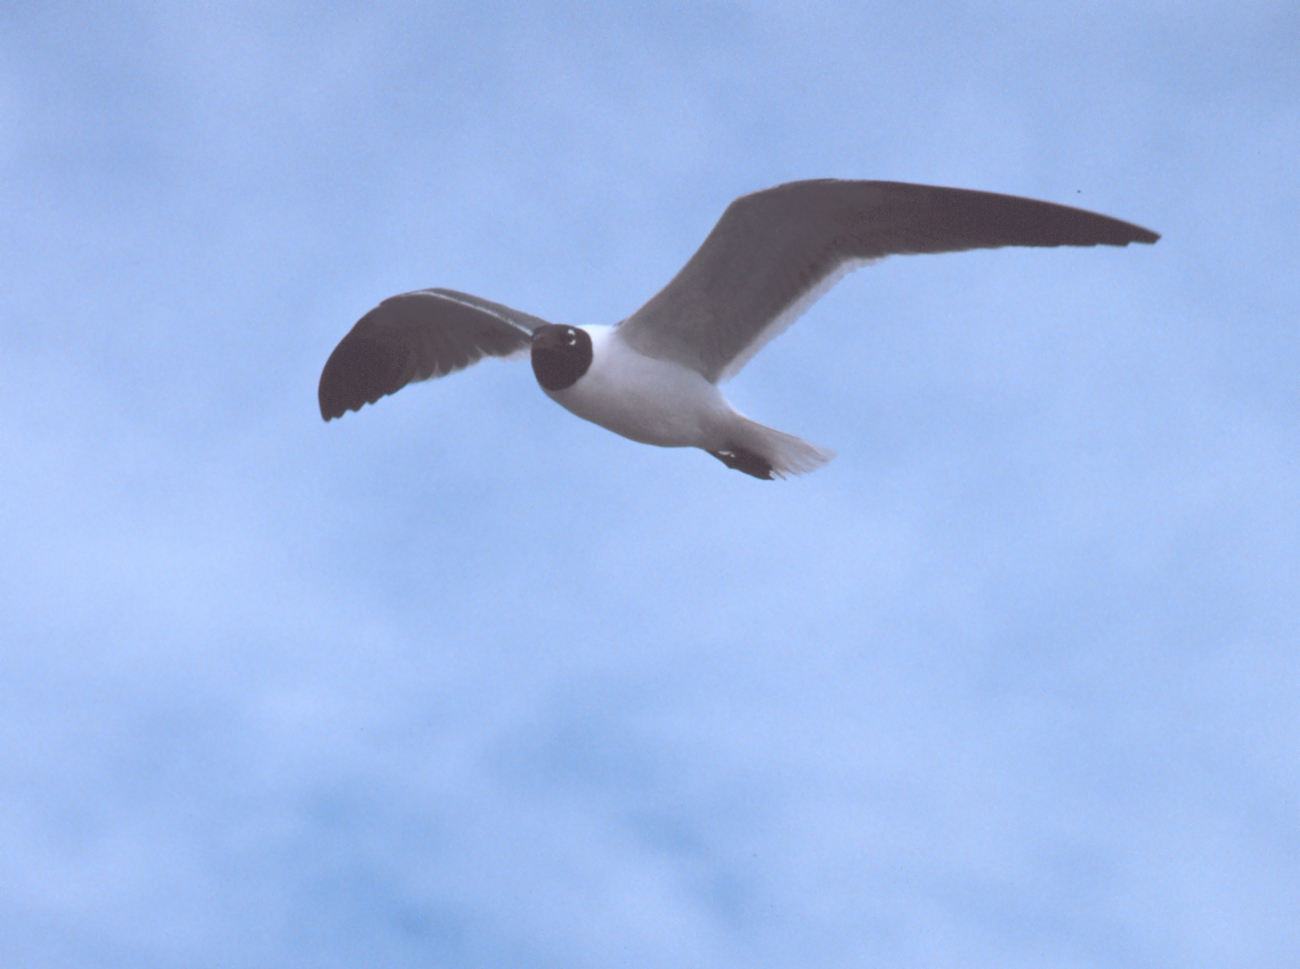 A laughing gull rides the wind over the NOAA Ship FERREL